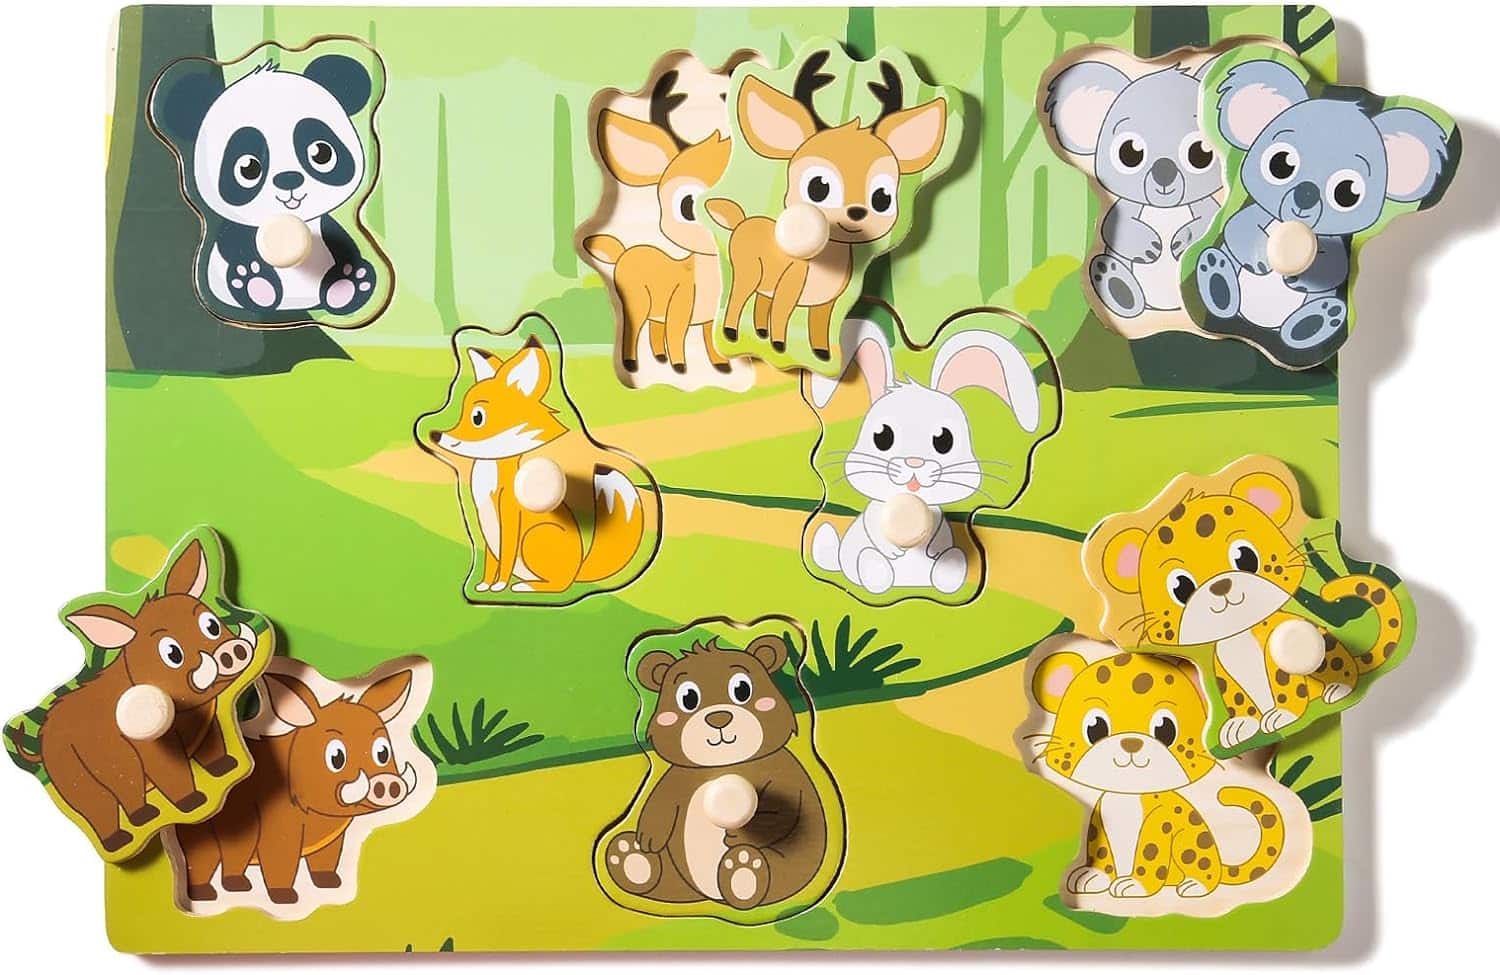 Wooden Puzzles for Toddlers 1-3, Forest Animals Peg Puzzles for Kids, Learning Educational Puzzles for Baby Puzzles 12-18 Months, Montessori Toys（Forest）